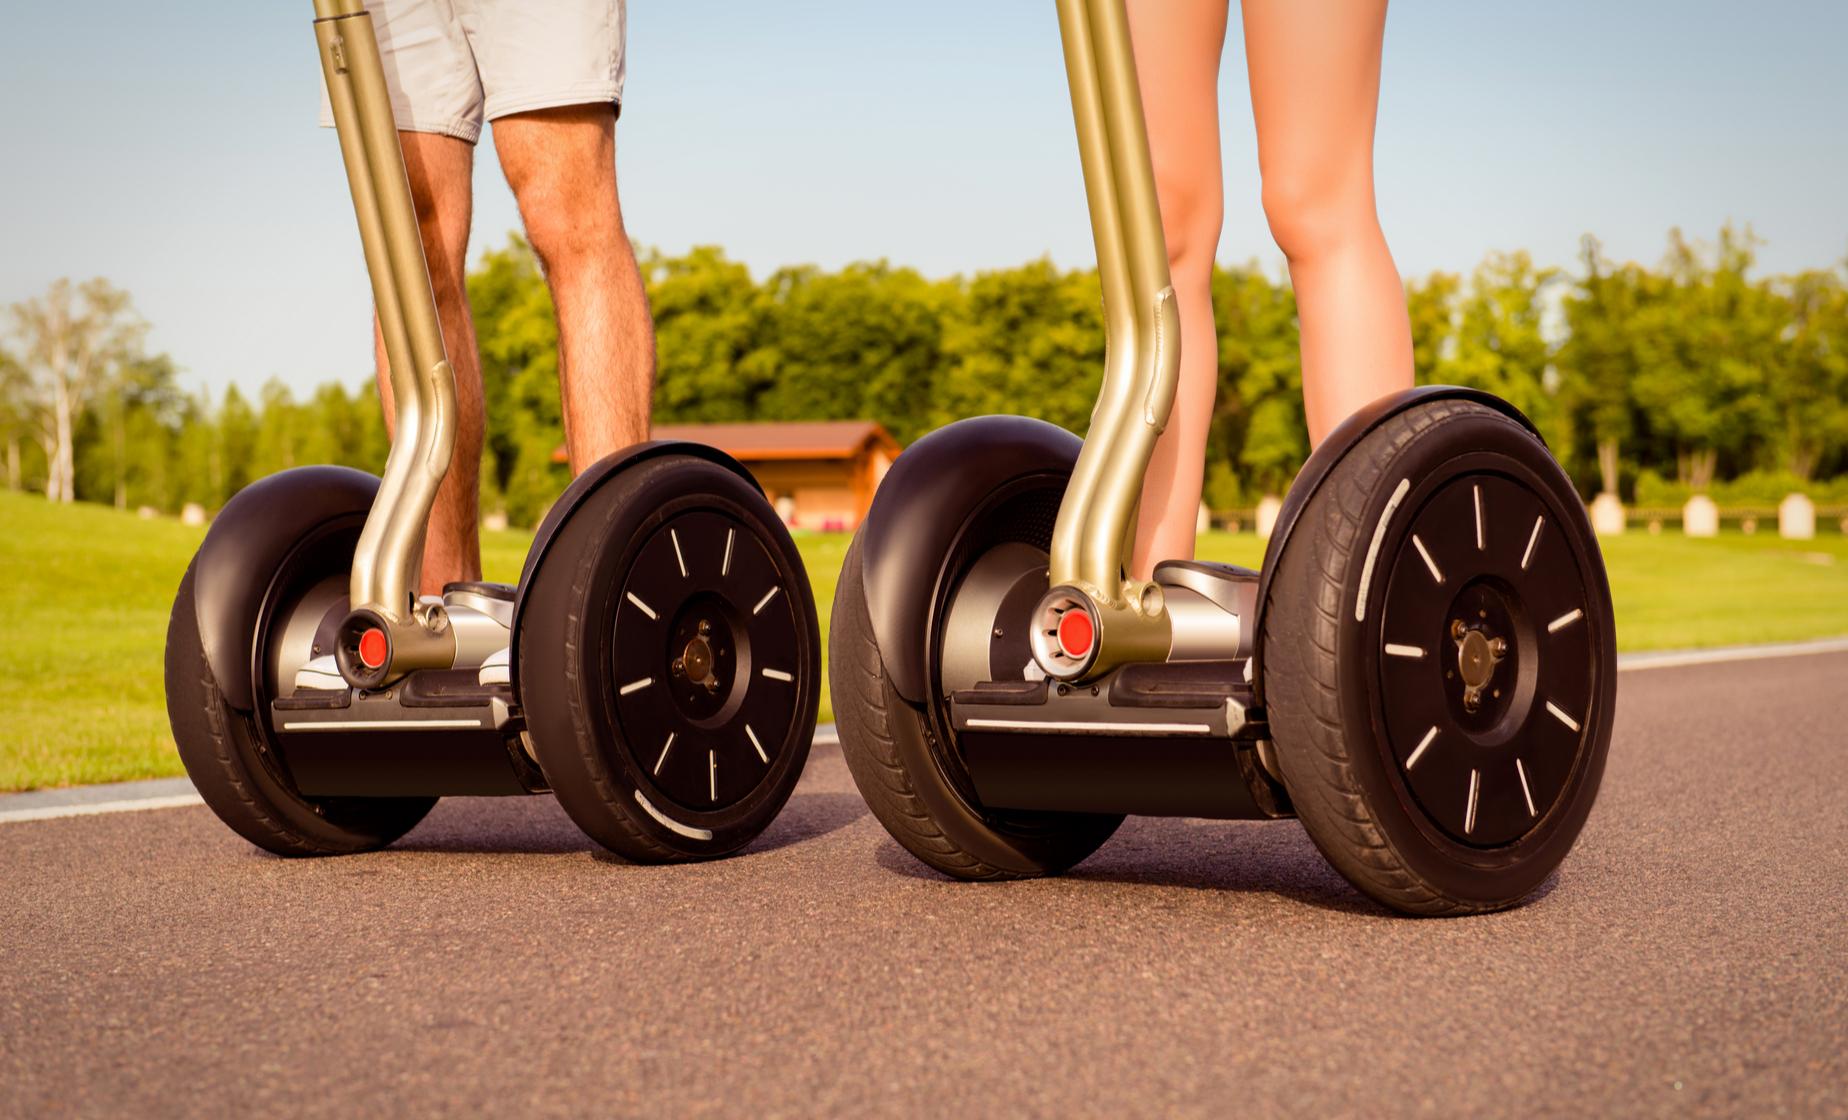 Off Road Segway Experience